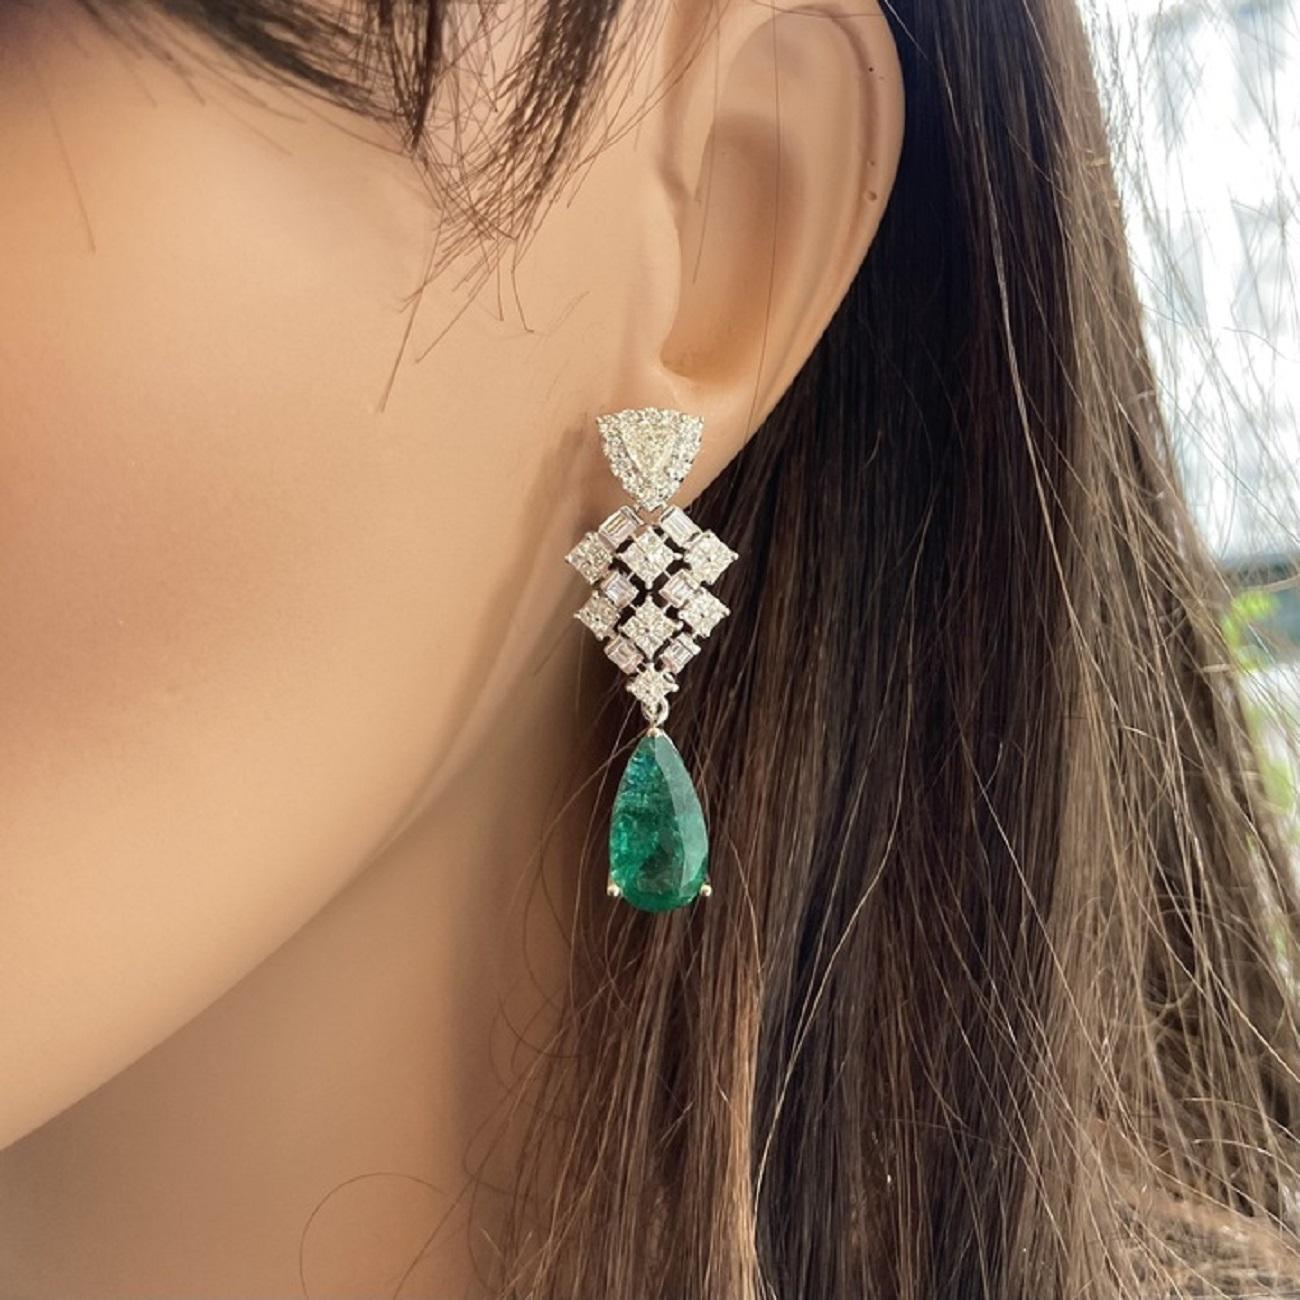 8.24 Carat Pear Shape Green Emerald Fashion Earrings In 18k White Gold In New Condition For Sale In Chicago, IL